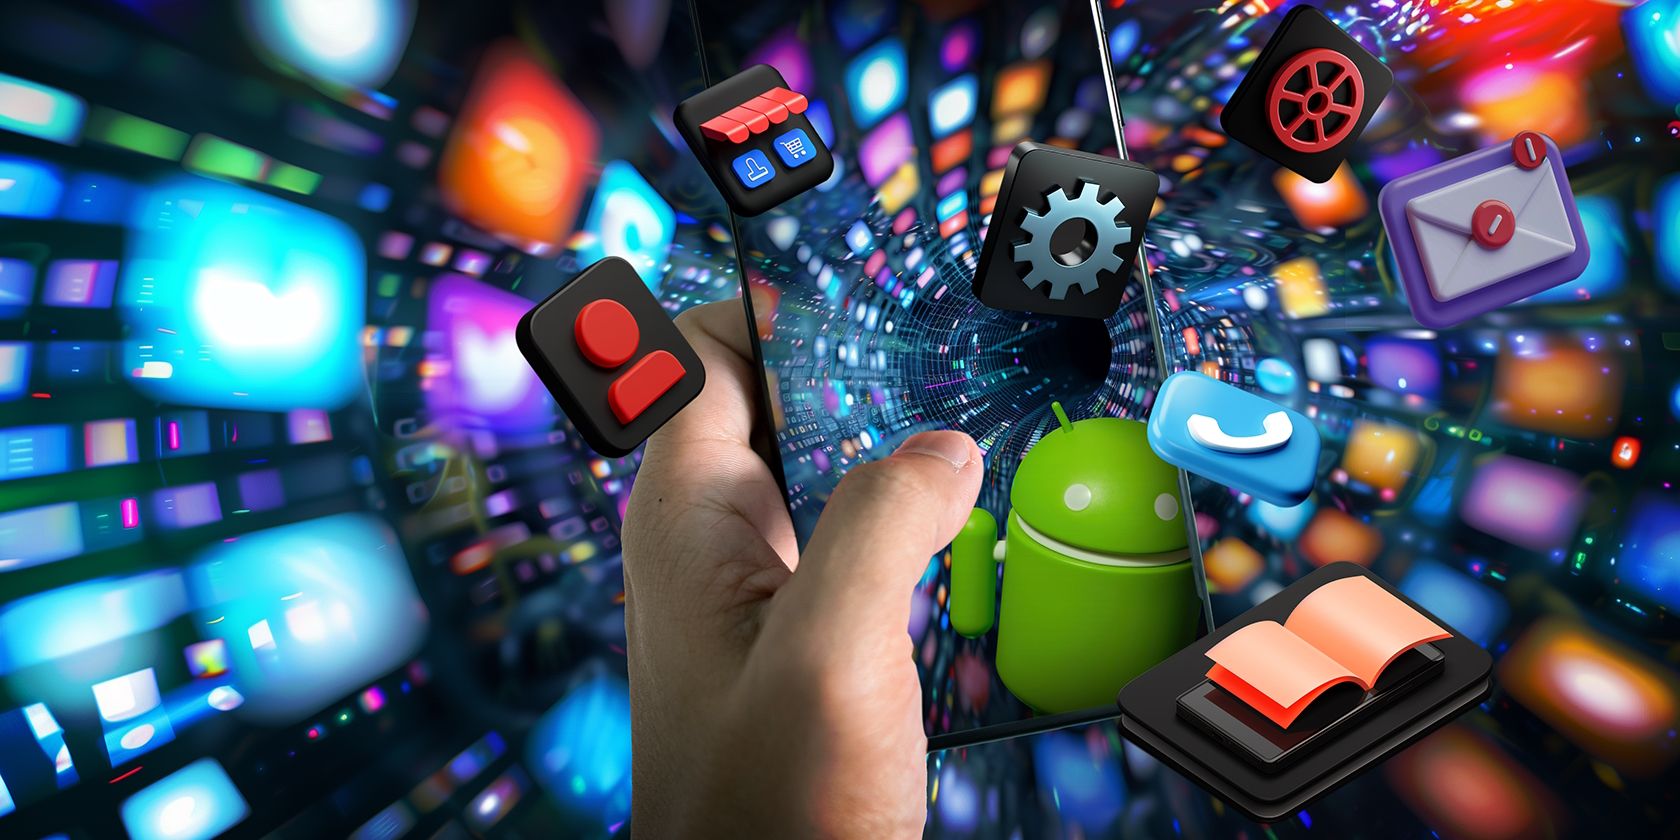 Hands holding a smartphone with vibrant app icons floating around in a dynamic, digital space